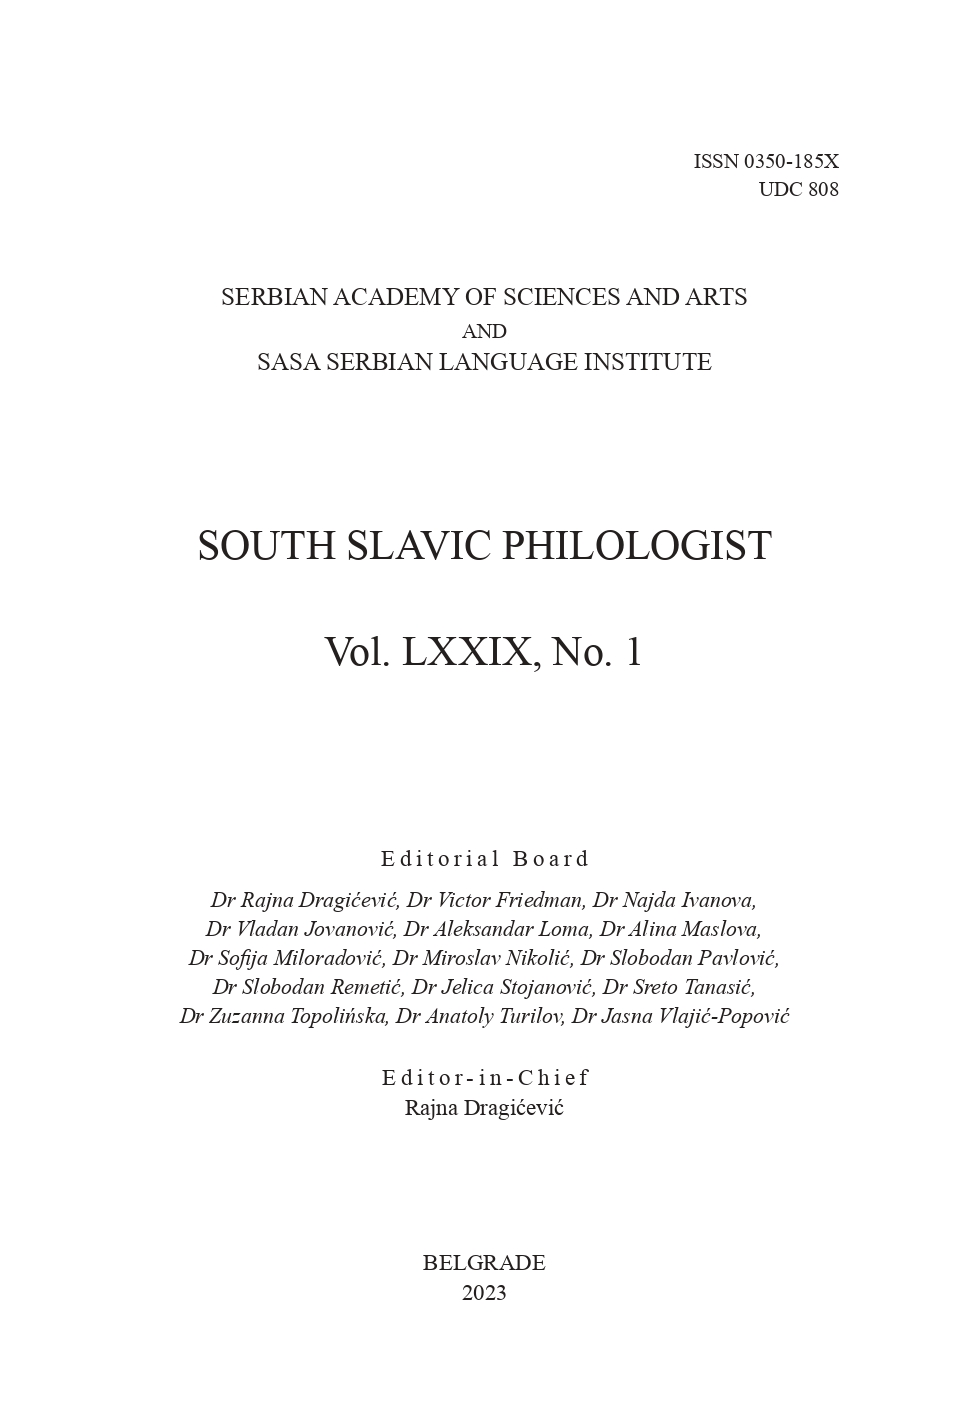 Isidora Bjelaković, Terminology in the literary languages of the Serbs 18th and 19th centuries (astronomy). Novi Sad: Matica srpska, 2022, 378 p. Cover Image